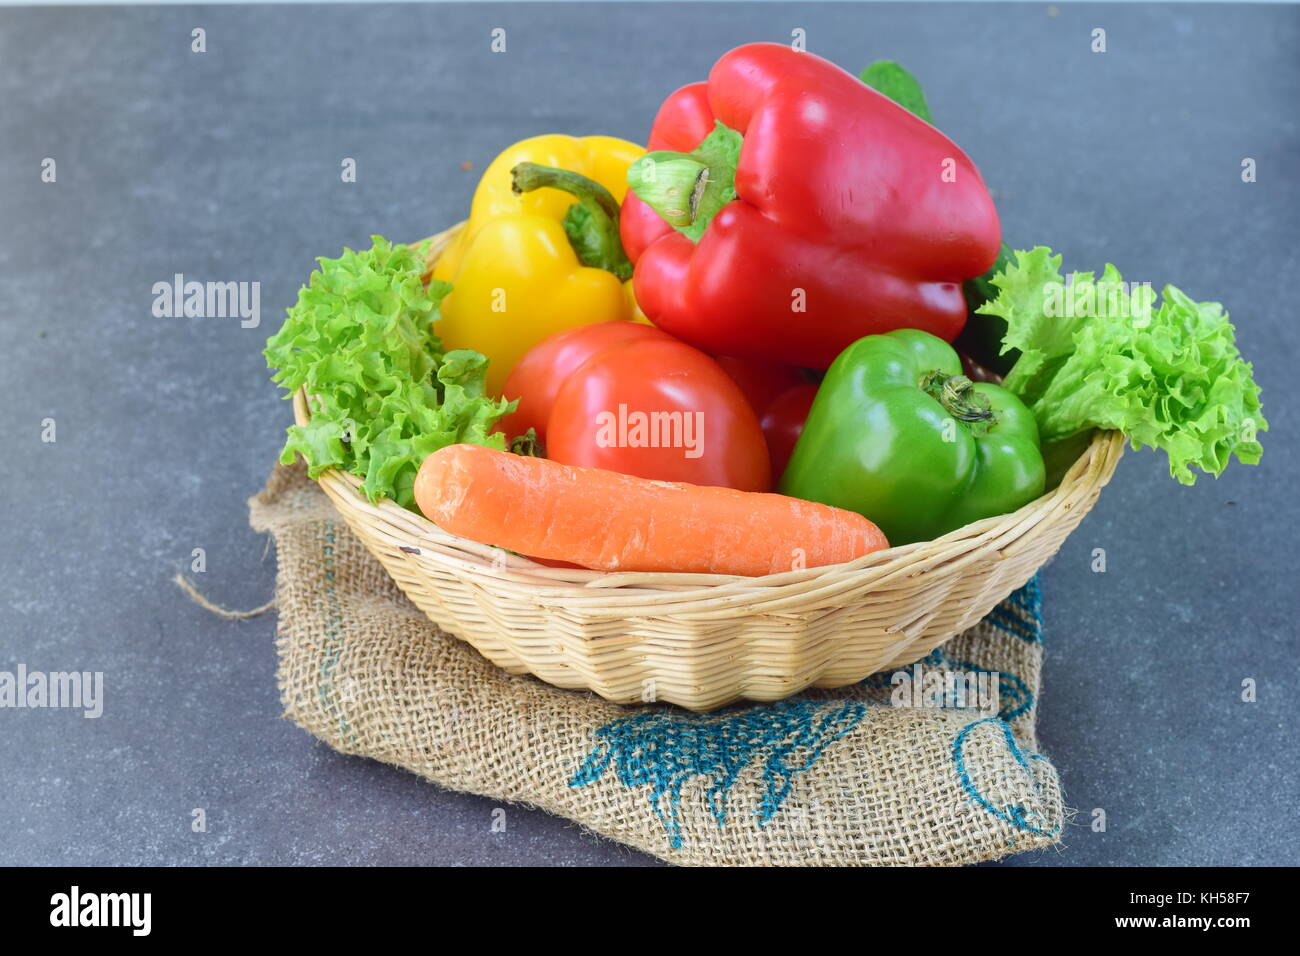 Fresh vegetables: paprika, tomato, onion,onion, carrot on a rustic textile cloth on a grey wooden background. Healthy eating concept Stock Photo